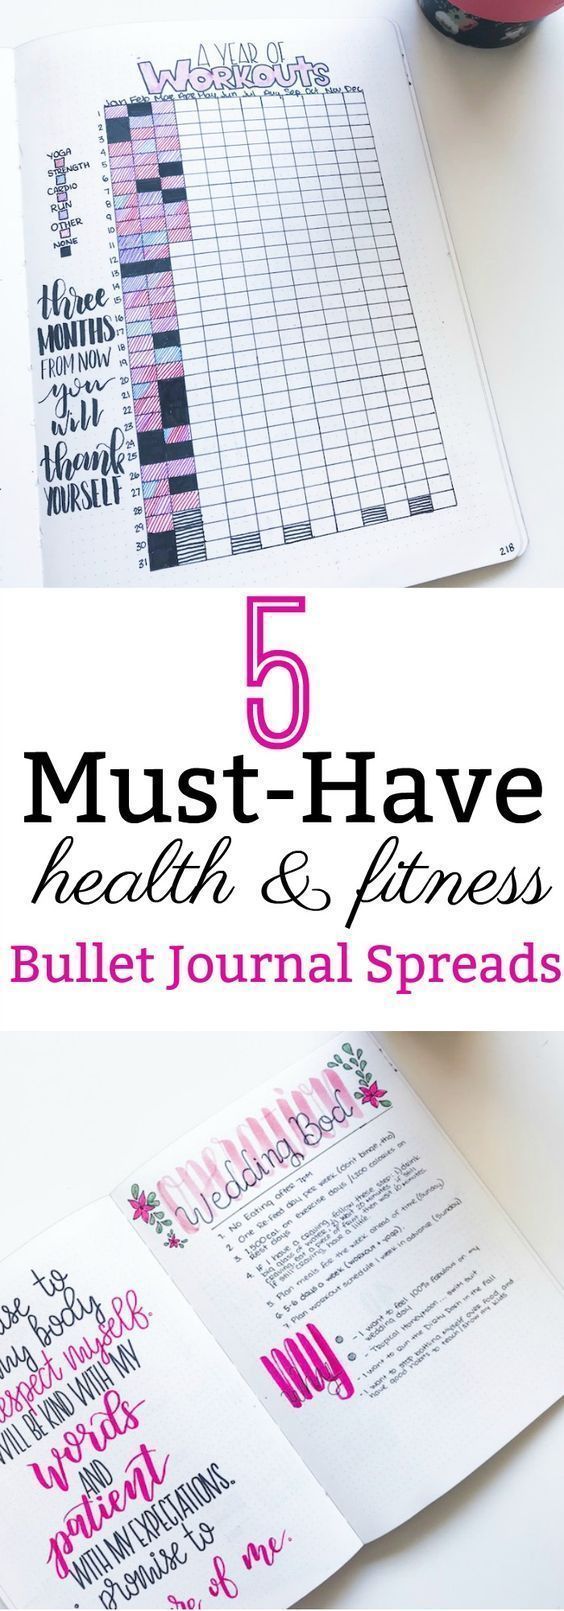 5 Must-Have Health and Fitness Bullet Journal Spreads ? The Petite Planner -   12 fitness Journal spreads ideas